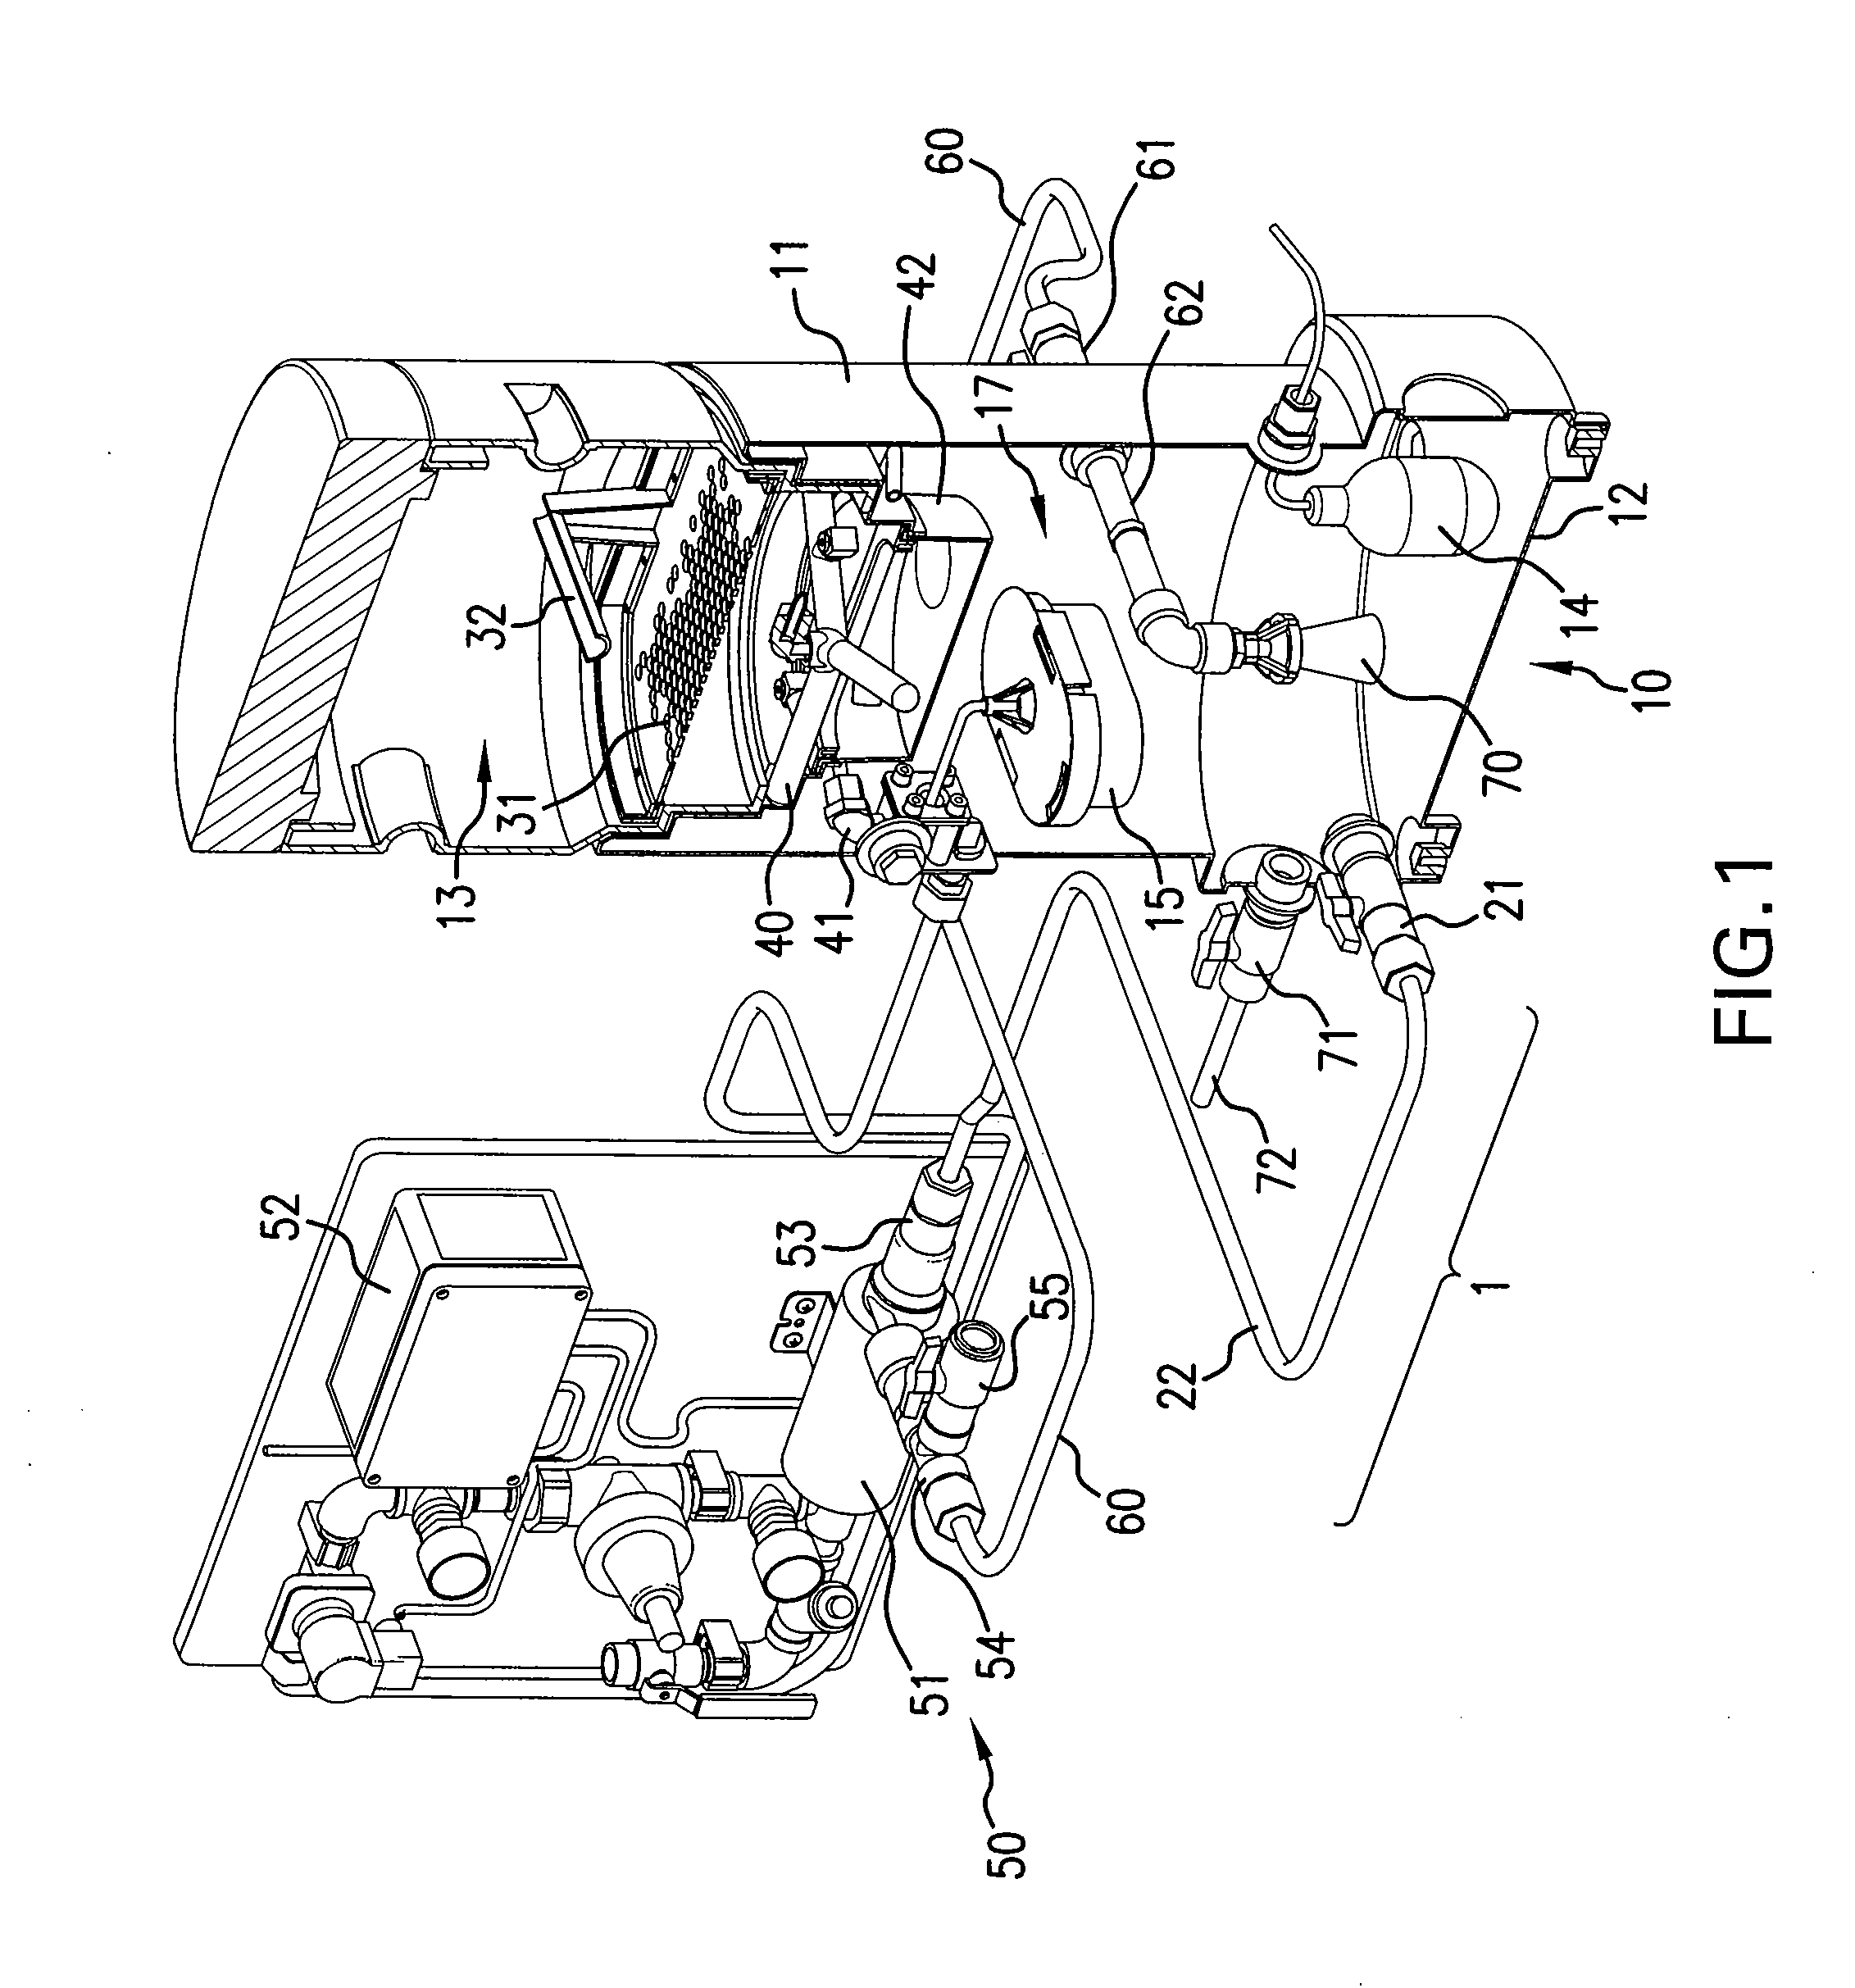 Apparatus and method for mixing a concentrated water treatment solution